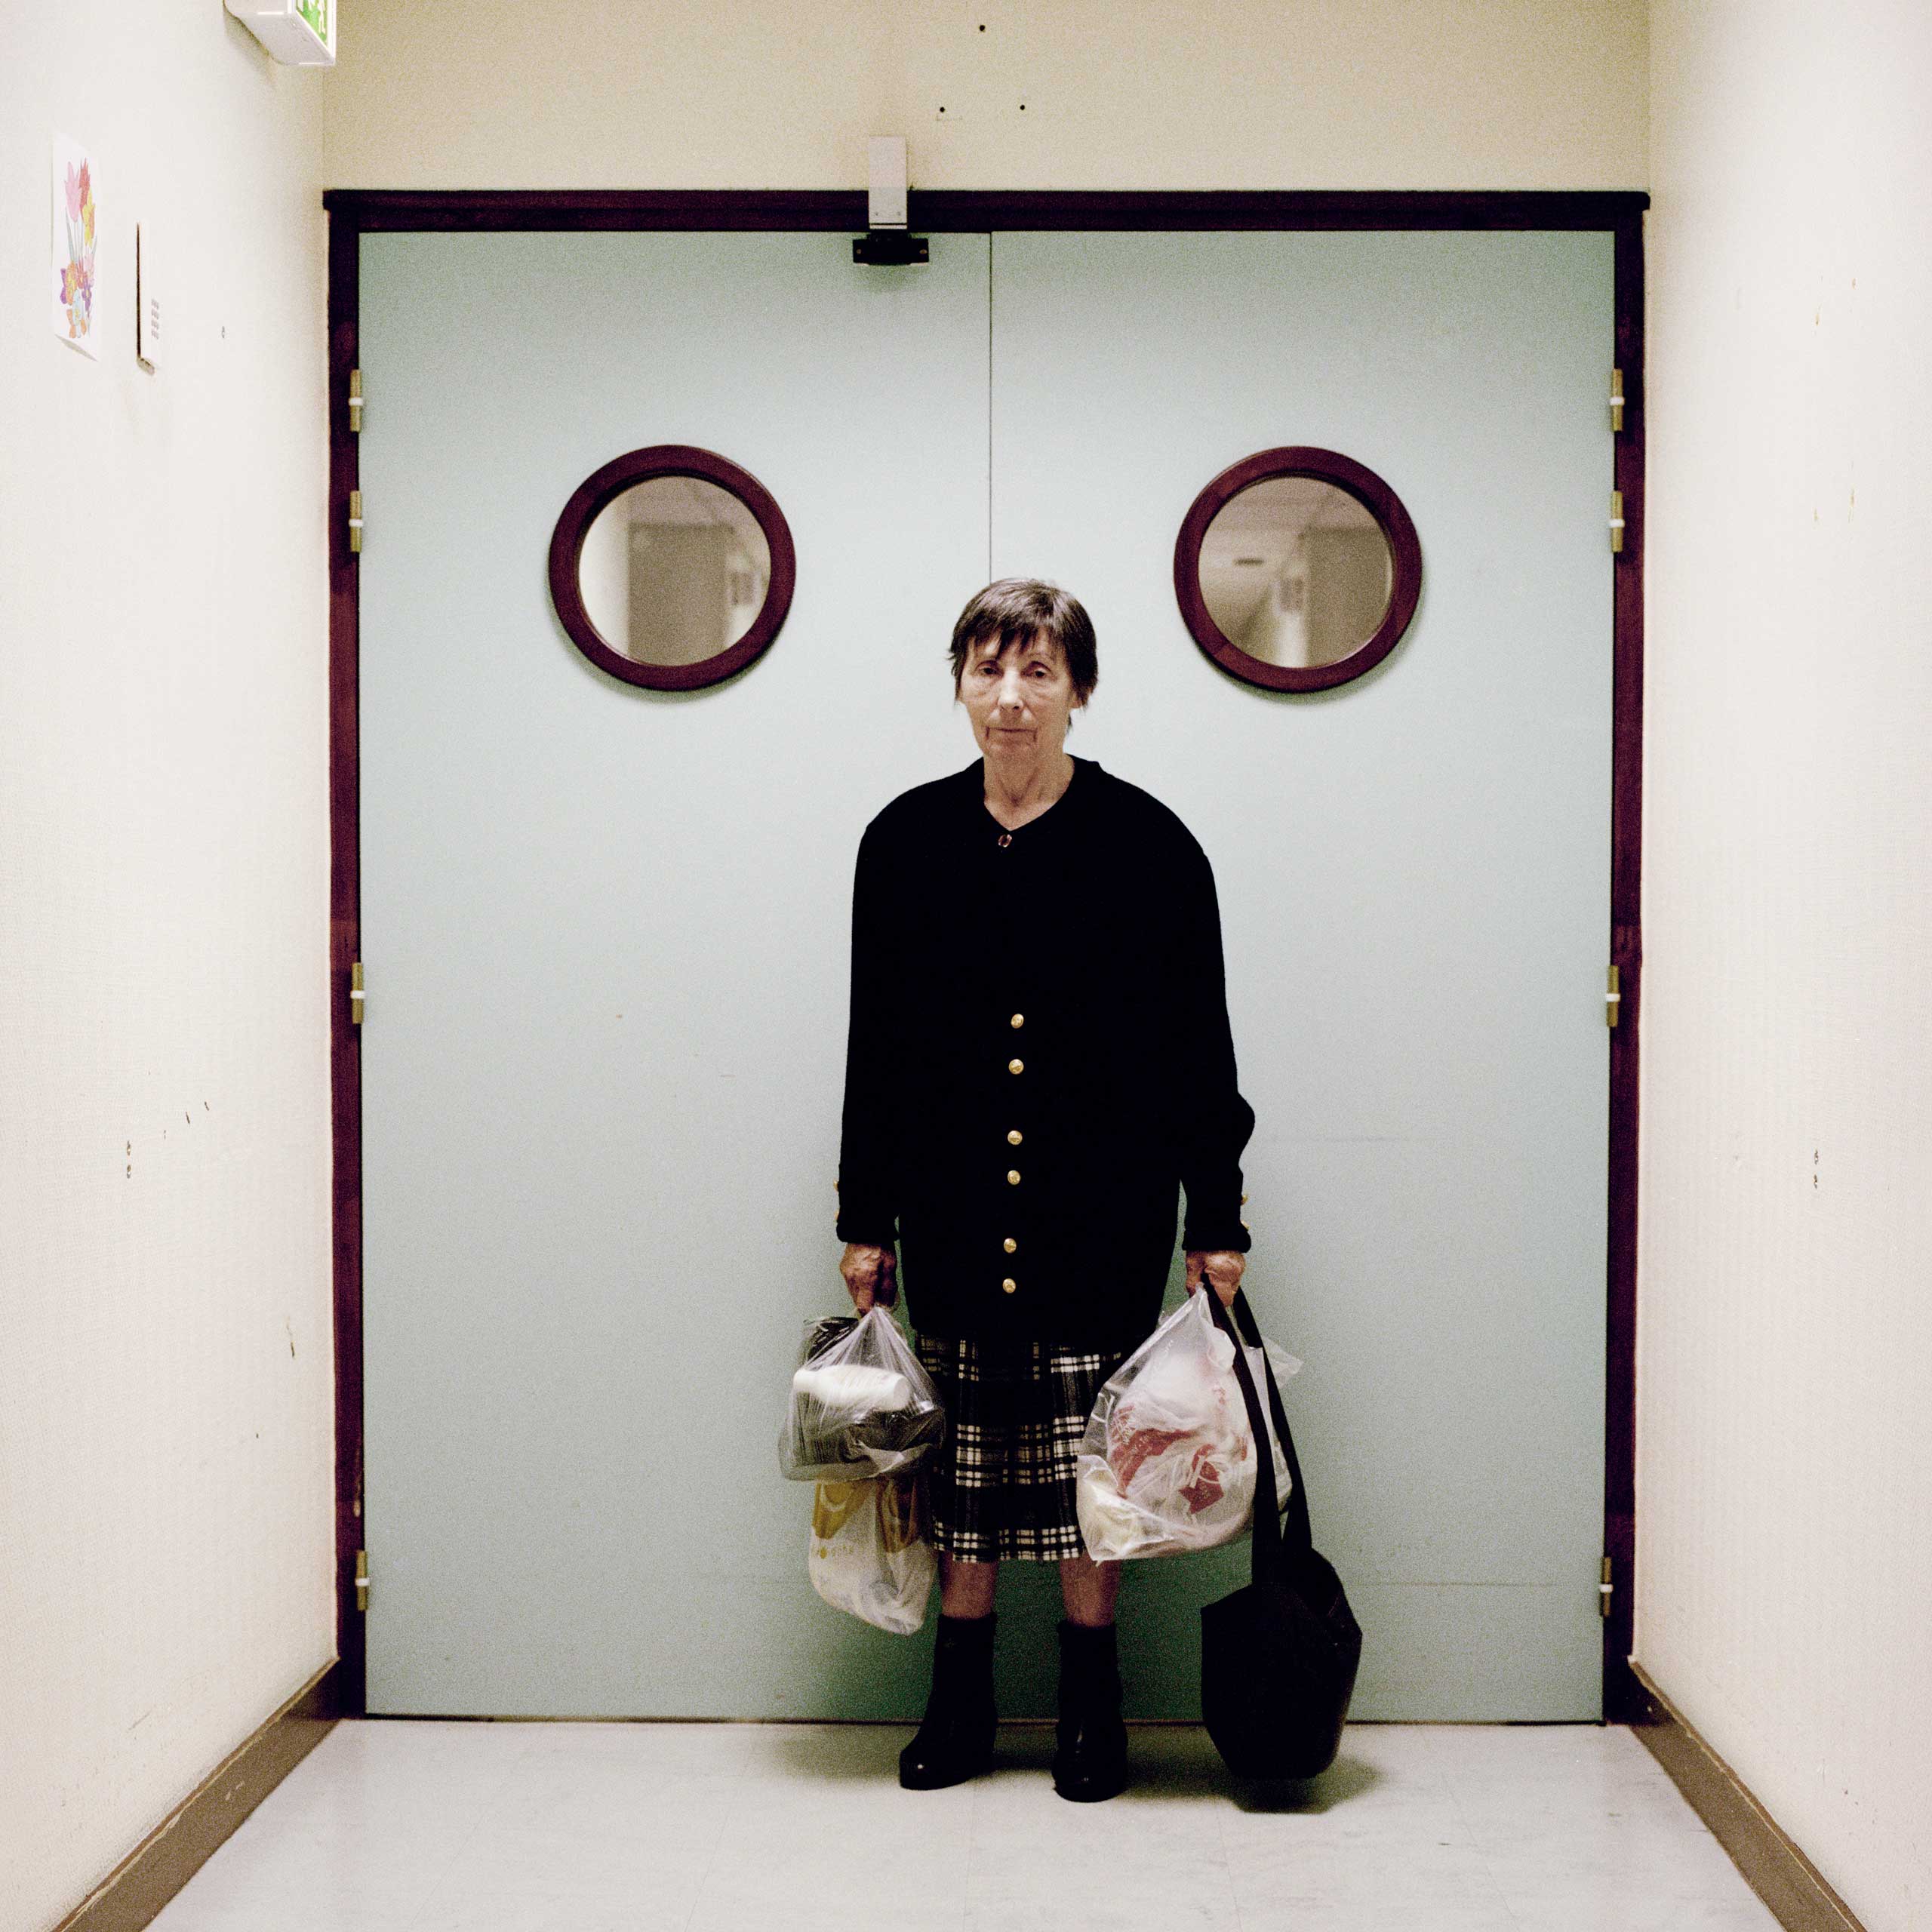 A resident stands in front of the ward’s locked exit door